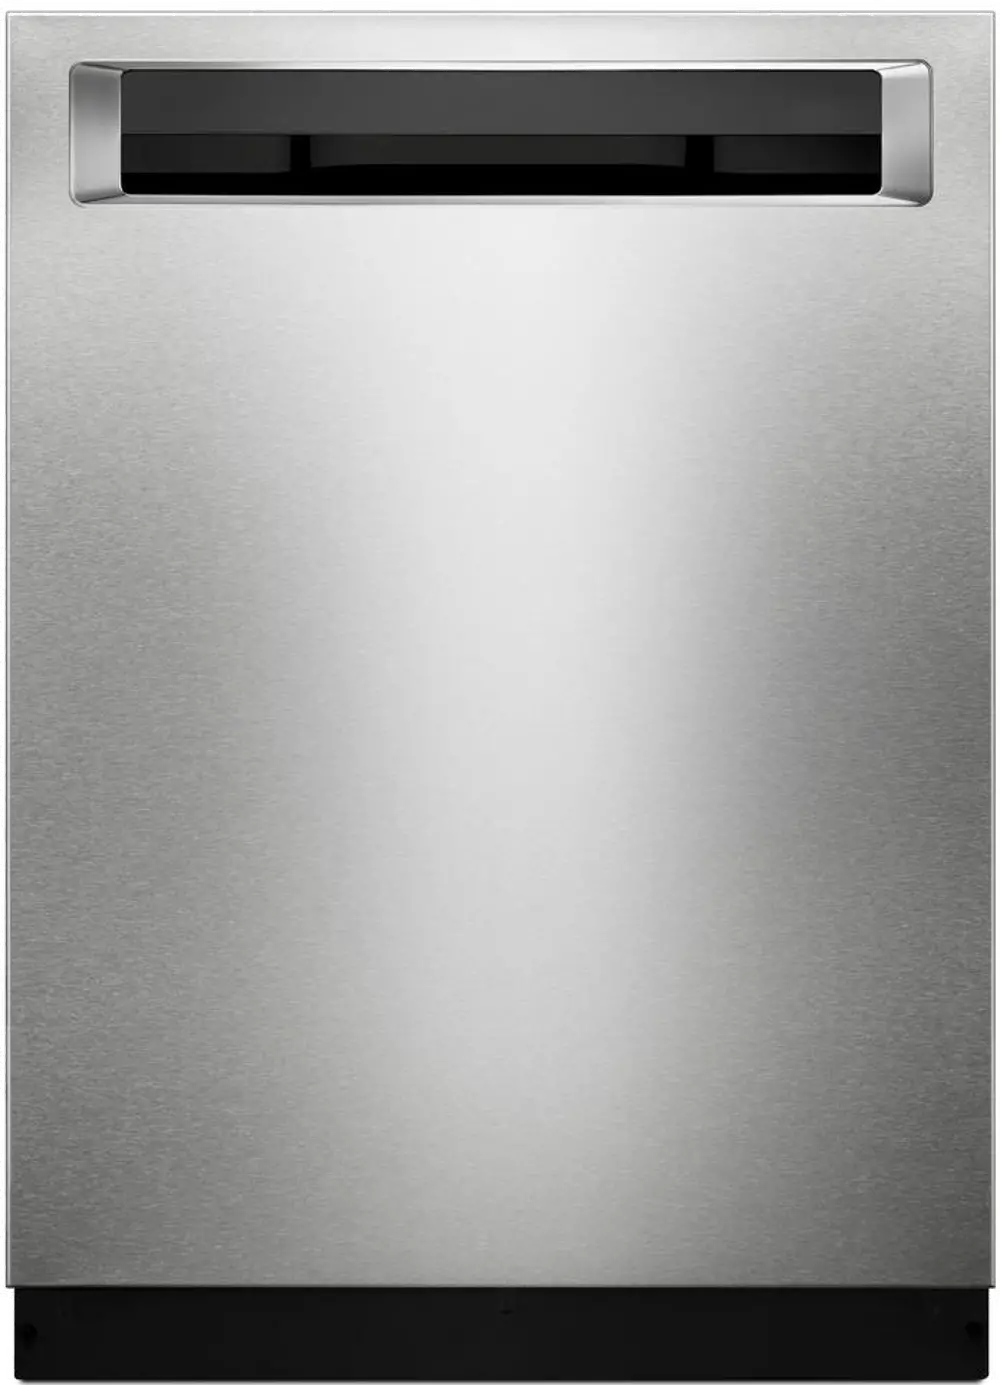 KDPE334GPS KitchenAid Dishwasher with Recessed Handle - Stainless Steel-1